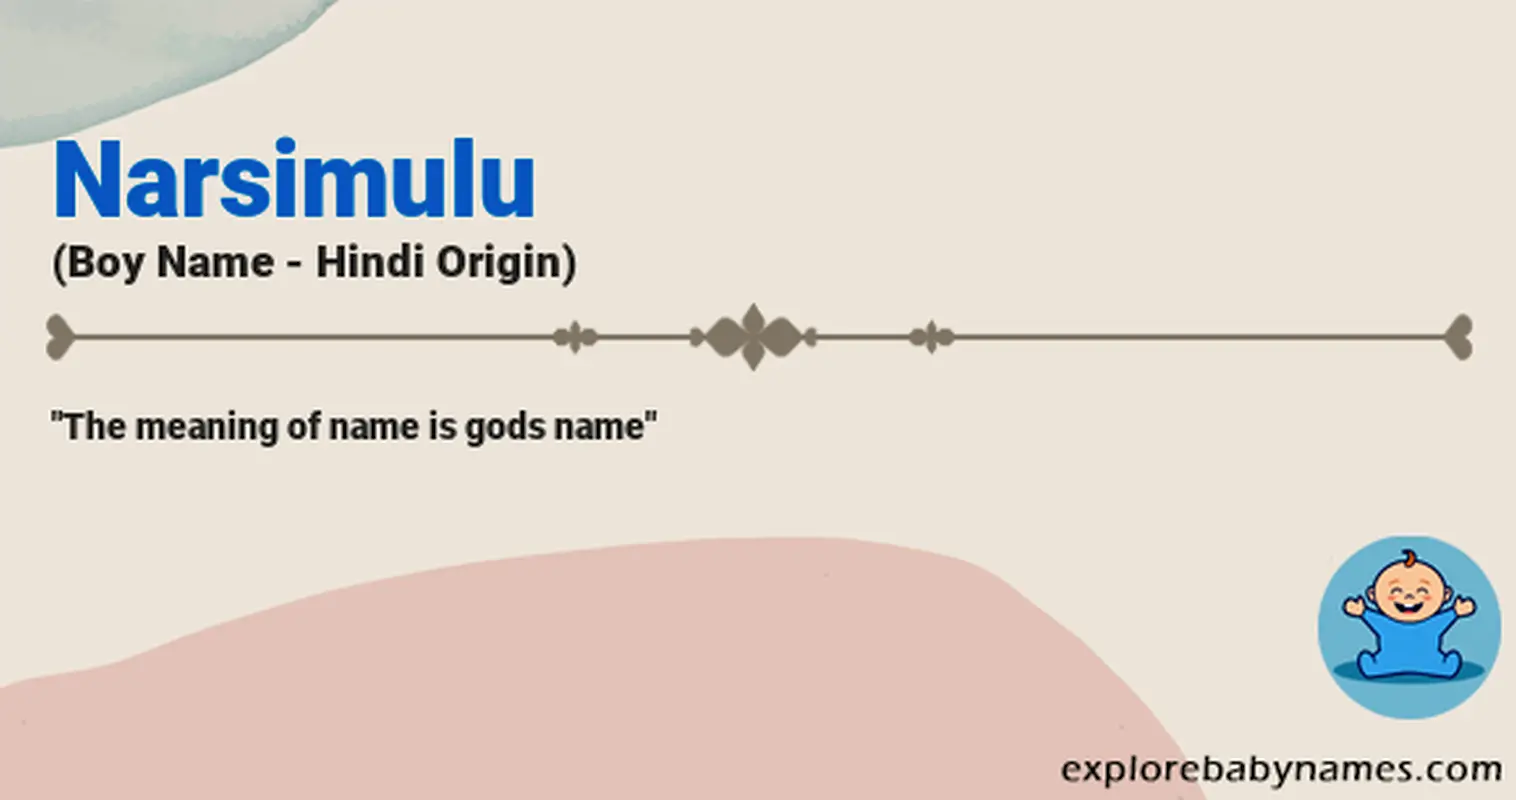 Meaning of Narsimulu